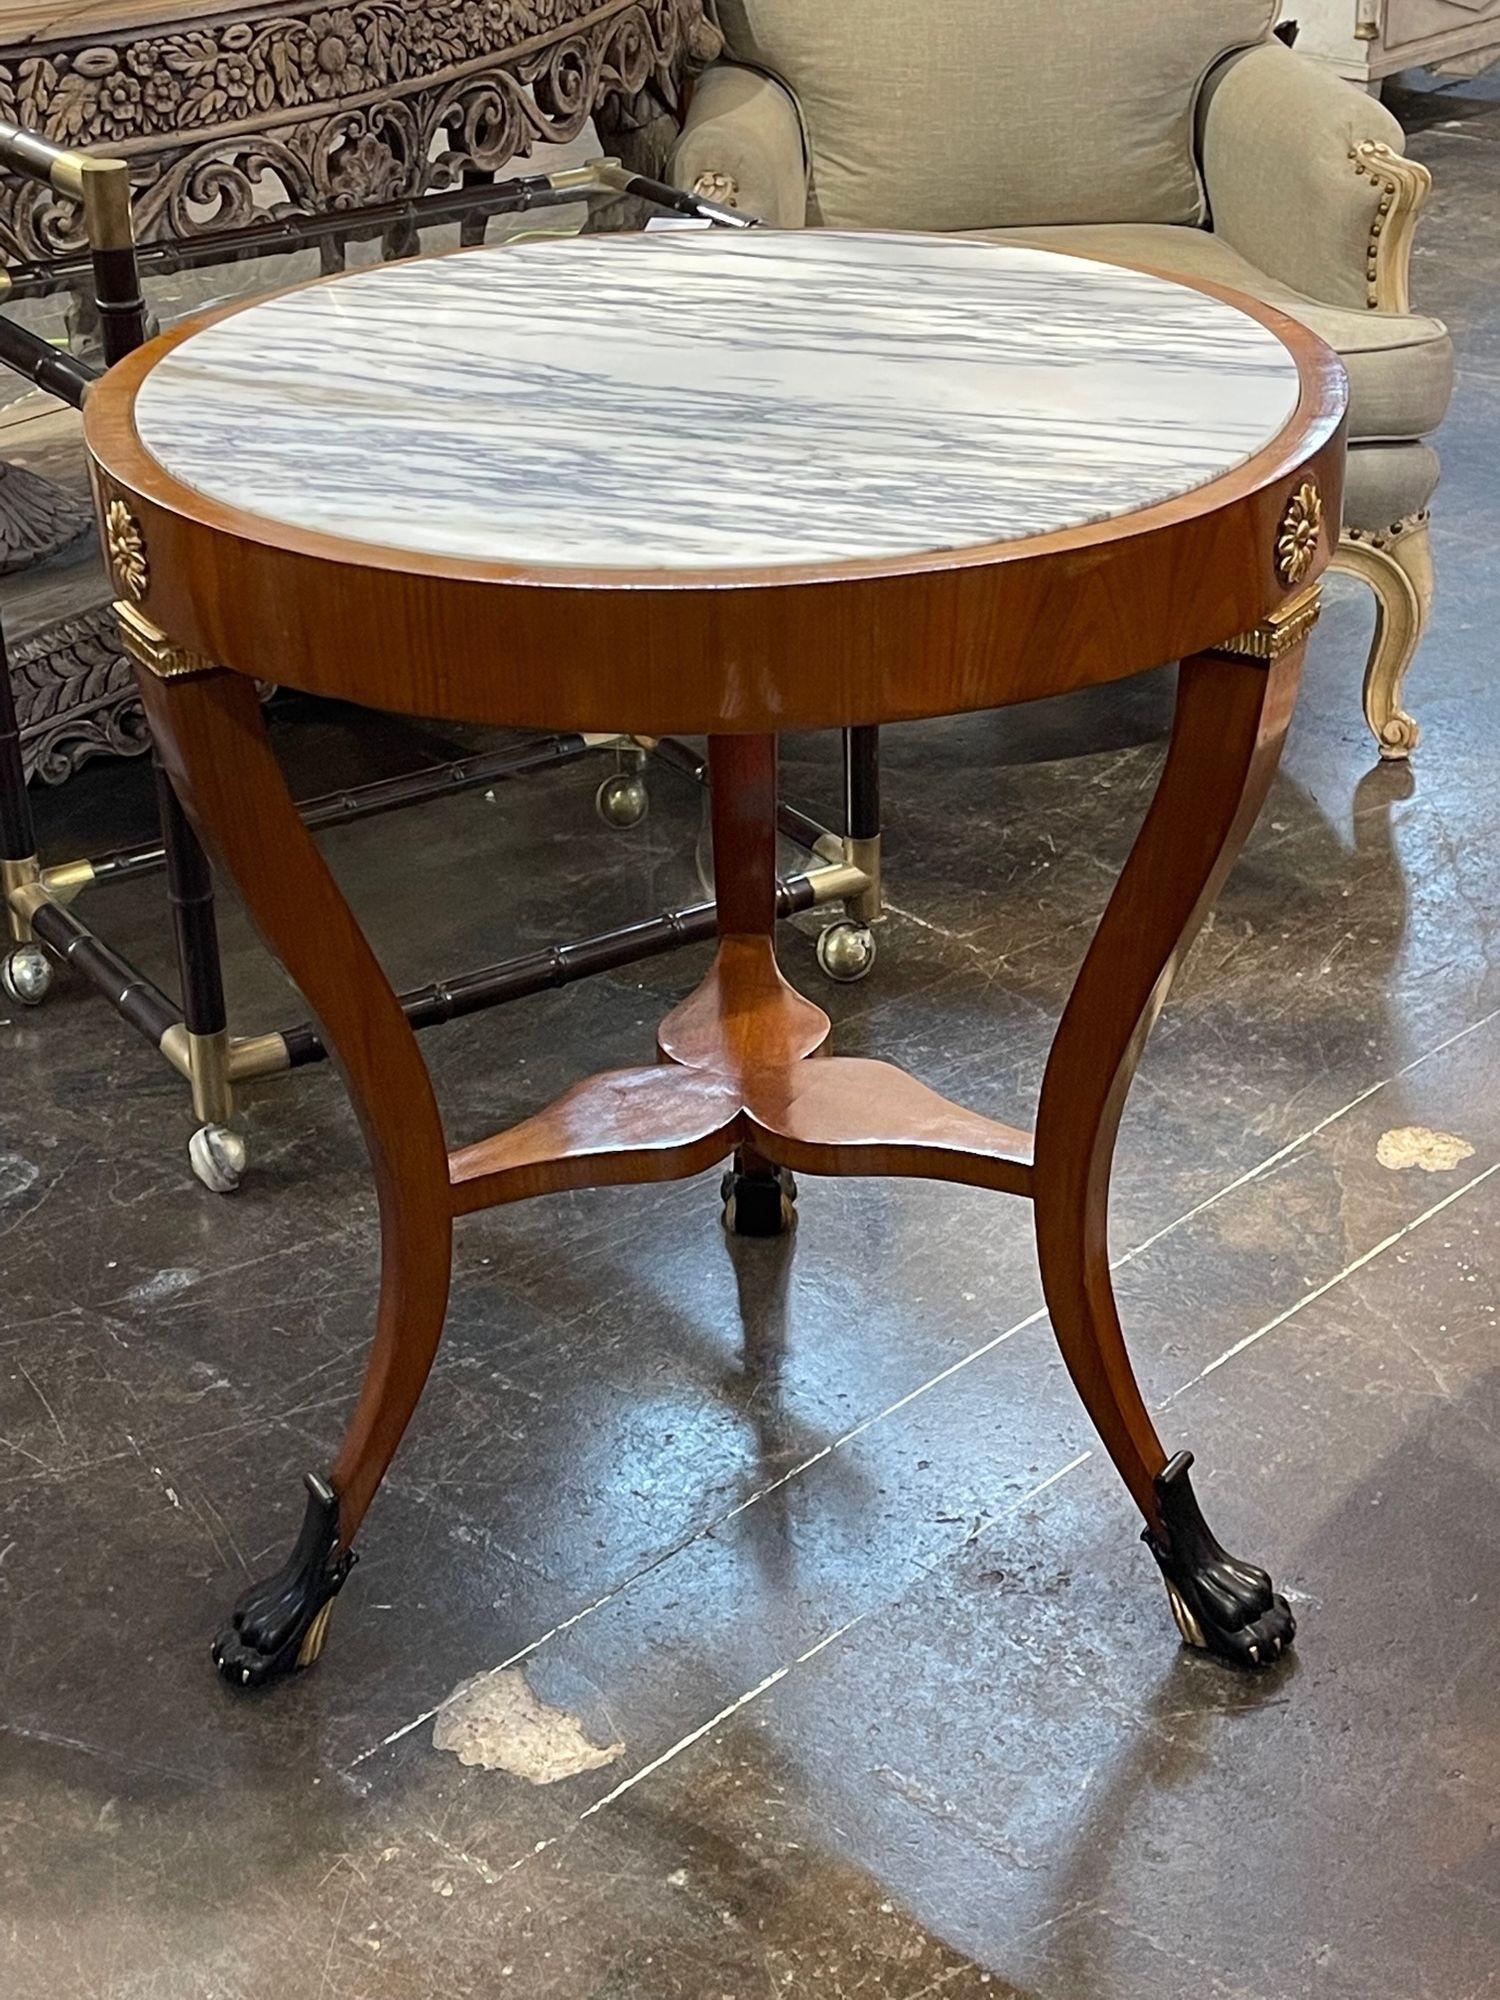 Stylish pair of Italian Empire style walnut and ebonized side tables. These also have beautiful inlaid marble, gilt details and claw feet. Creates a lovely upscale look! 